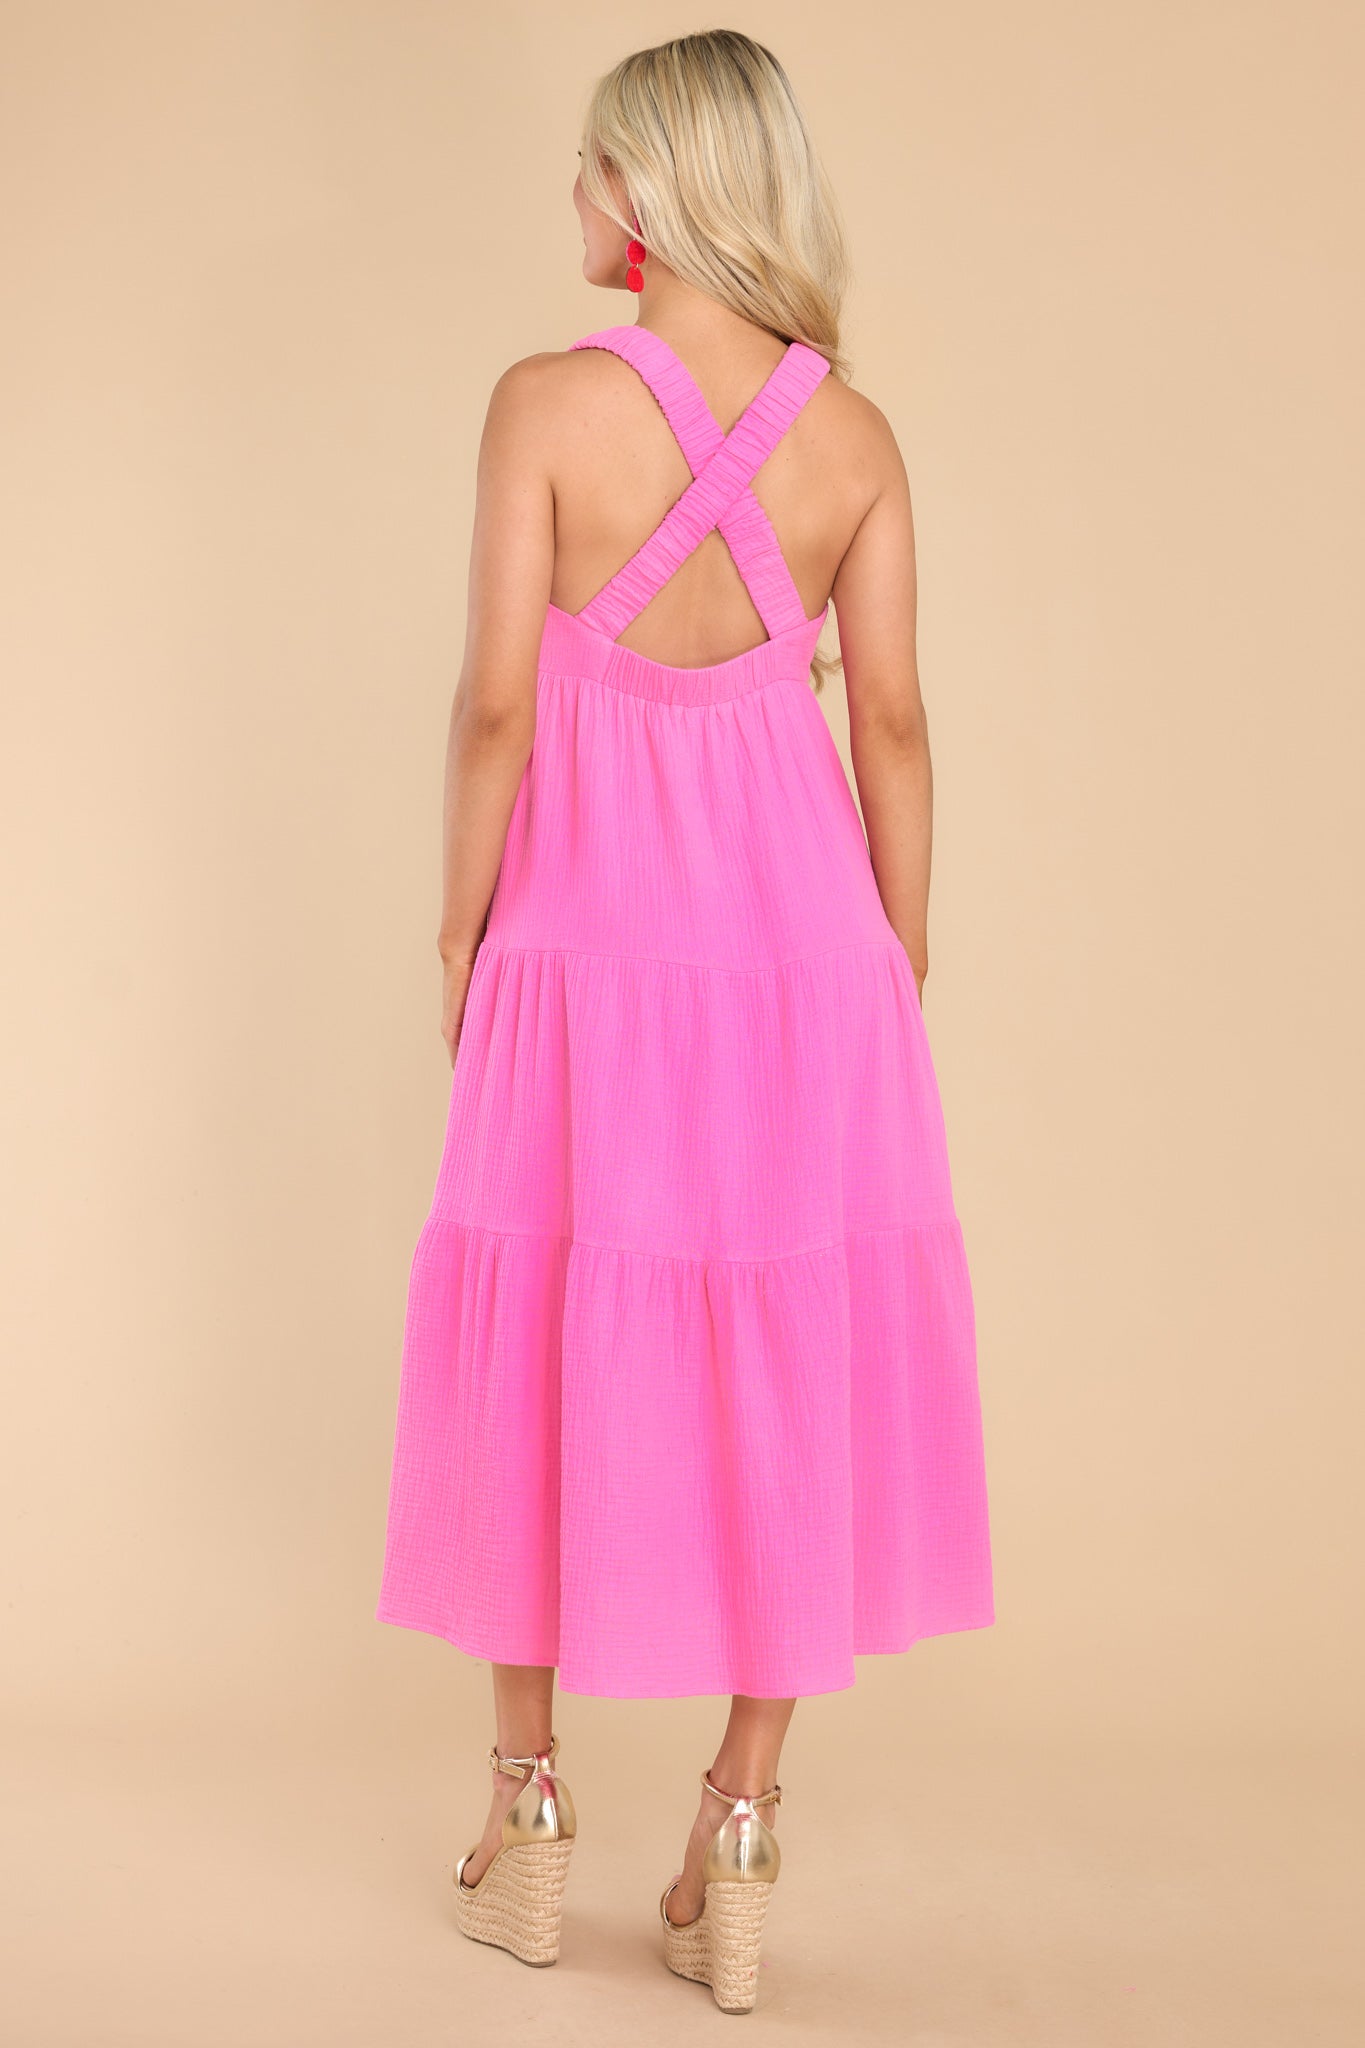 Clothed In Sunshine Pink Midi Dress - Red Dress